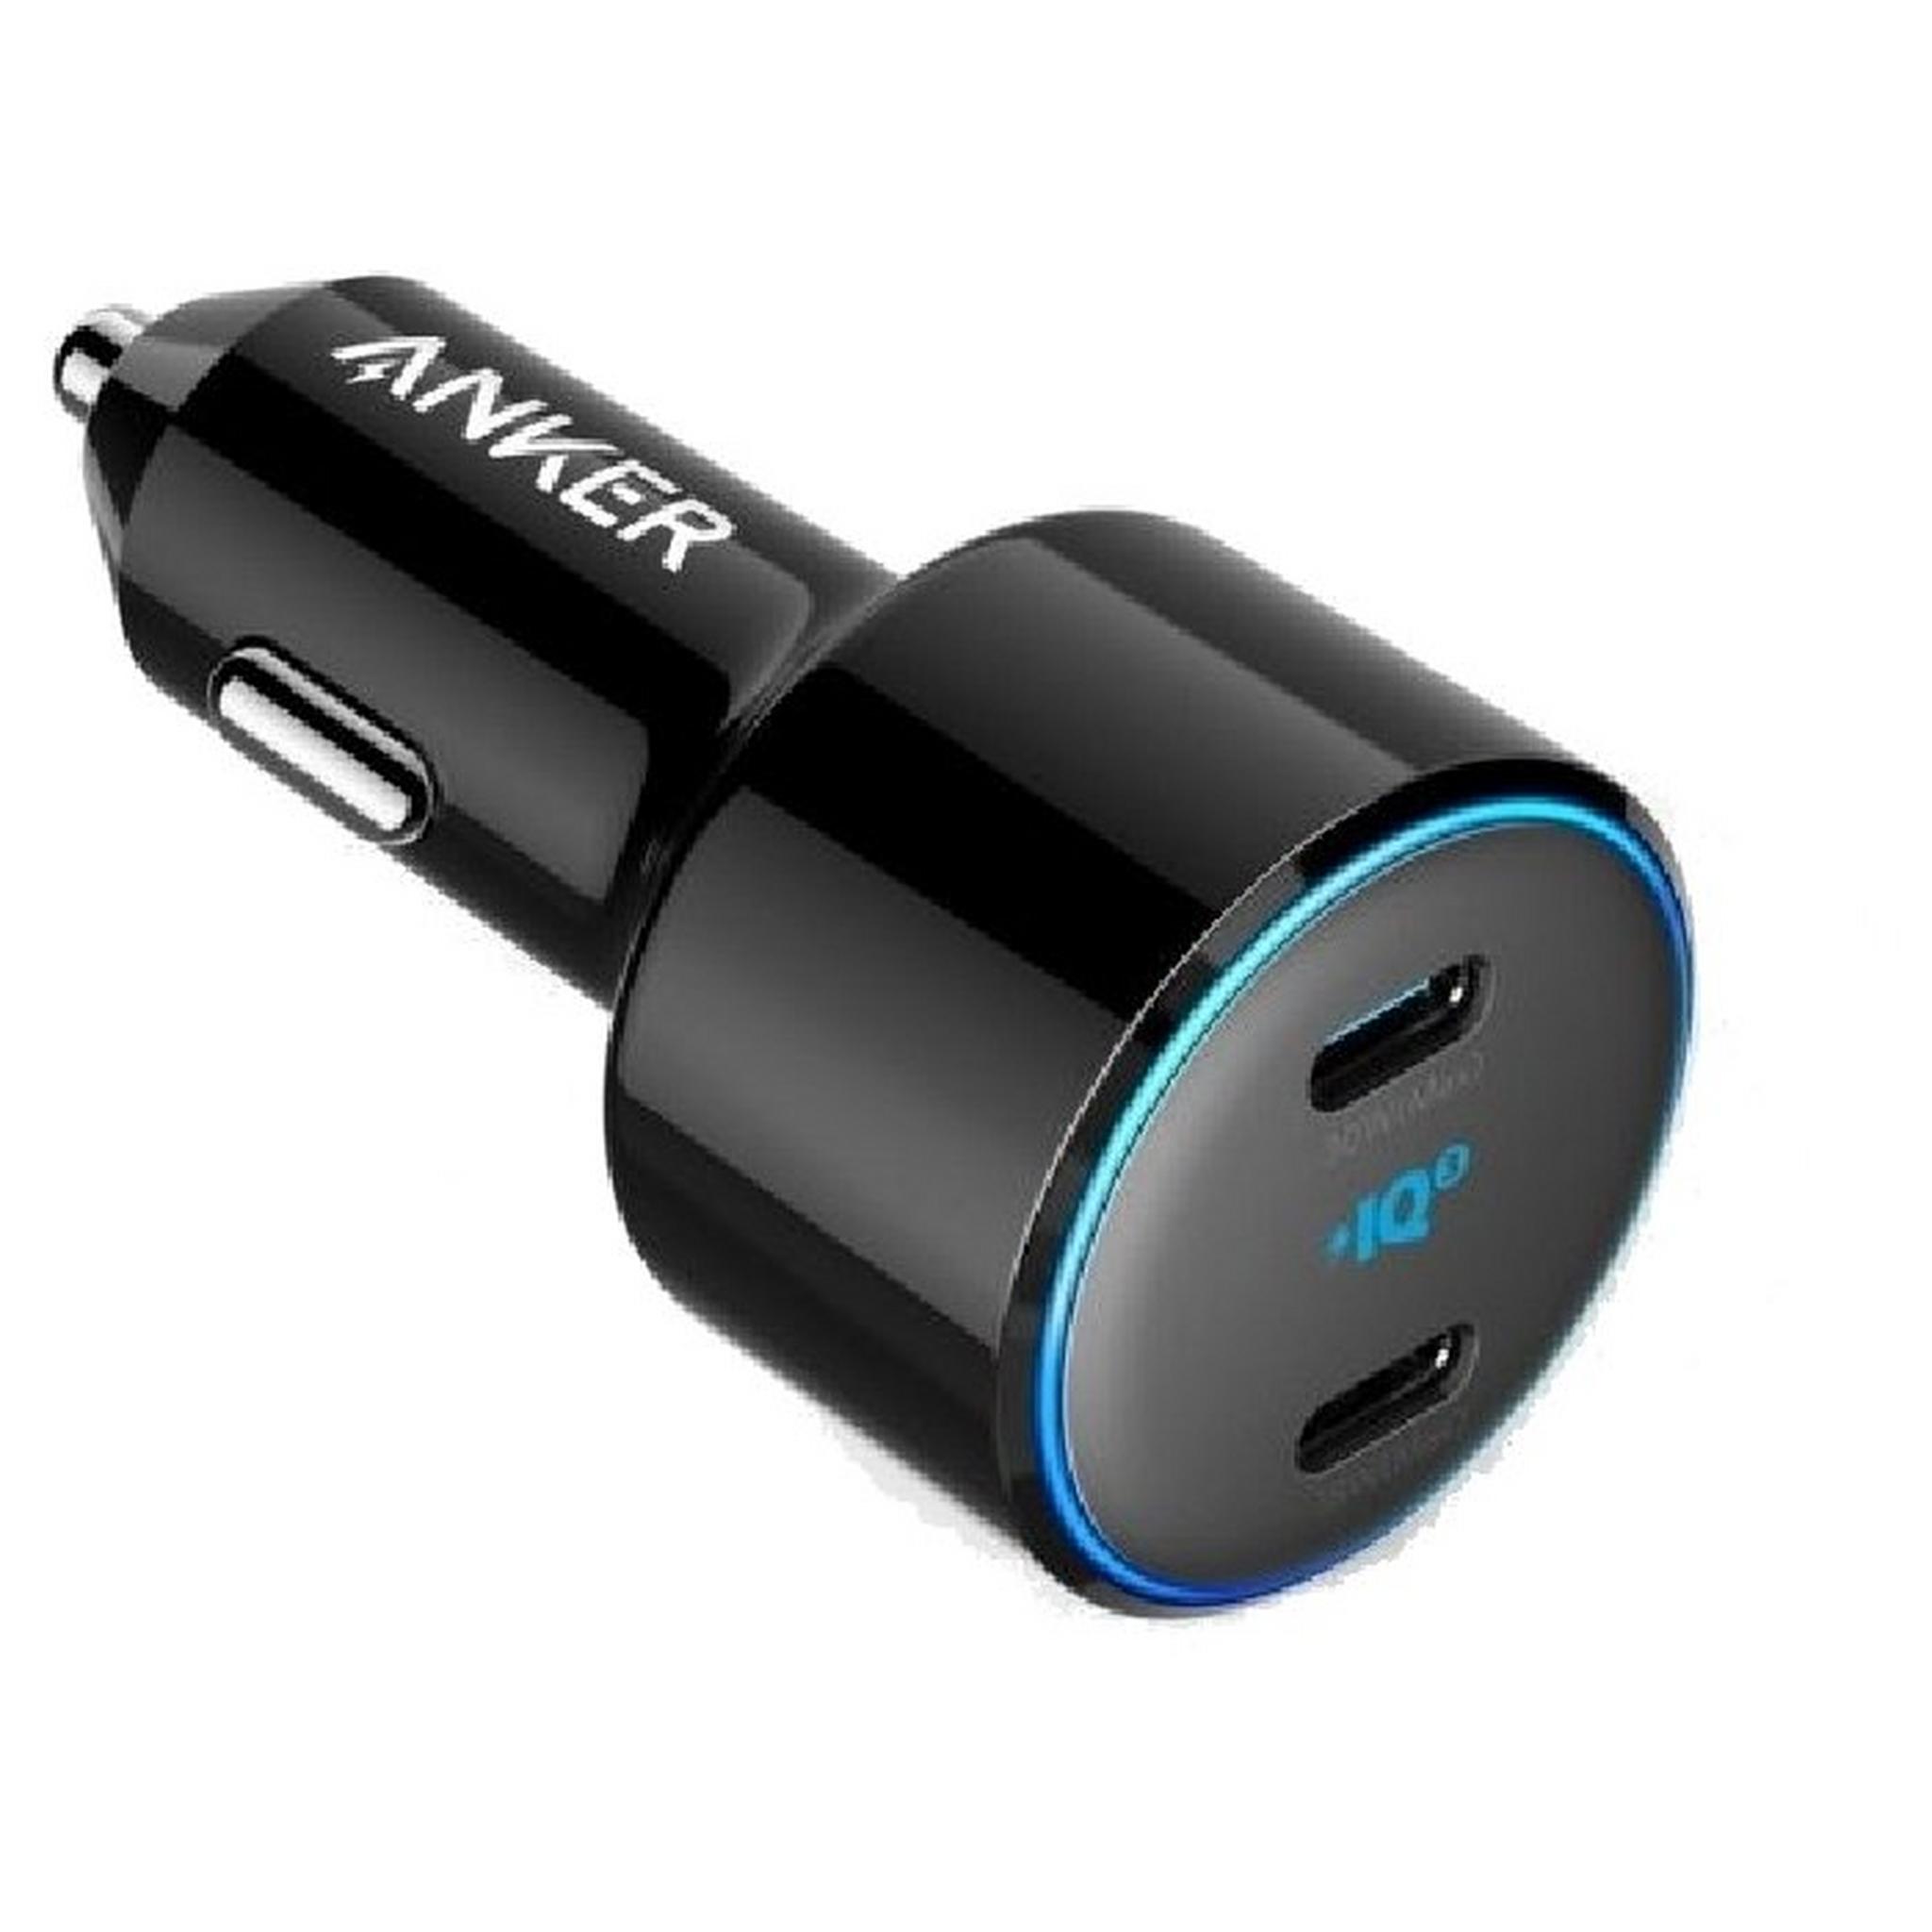 Anker PowerDrive+ III Duo 48W 2-Port Car Charger - Black